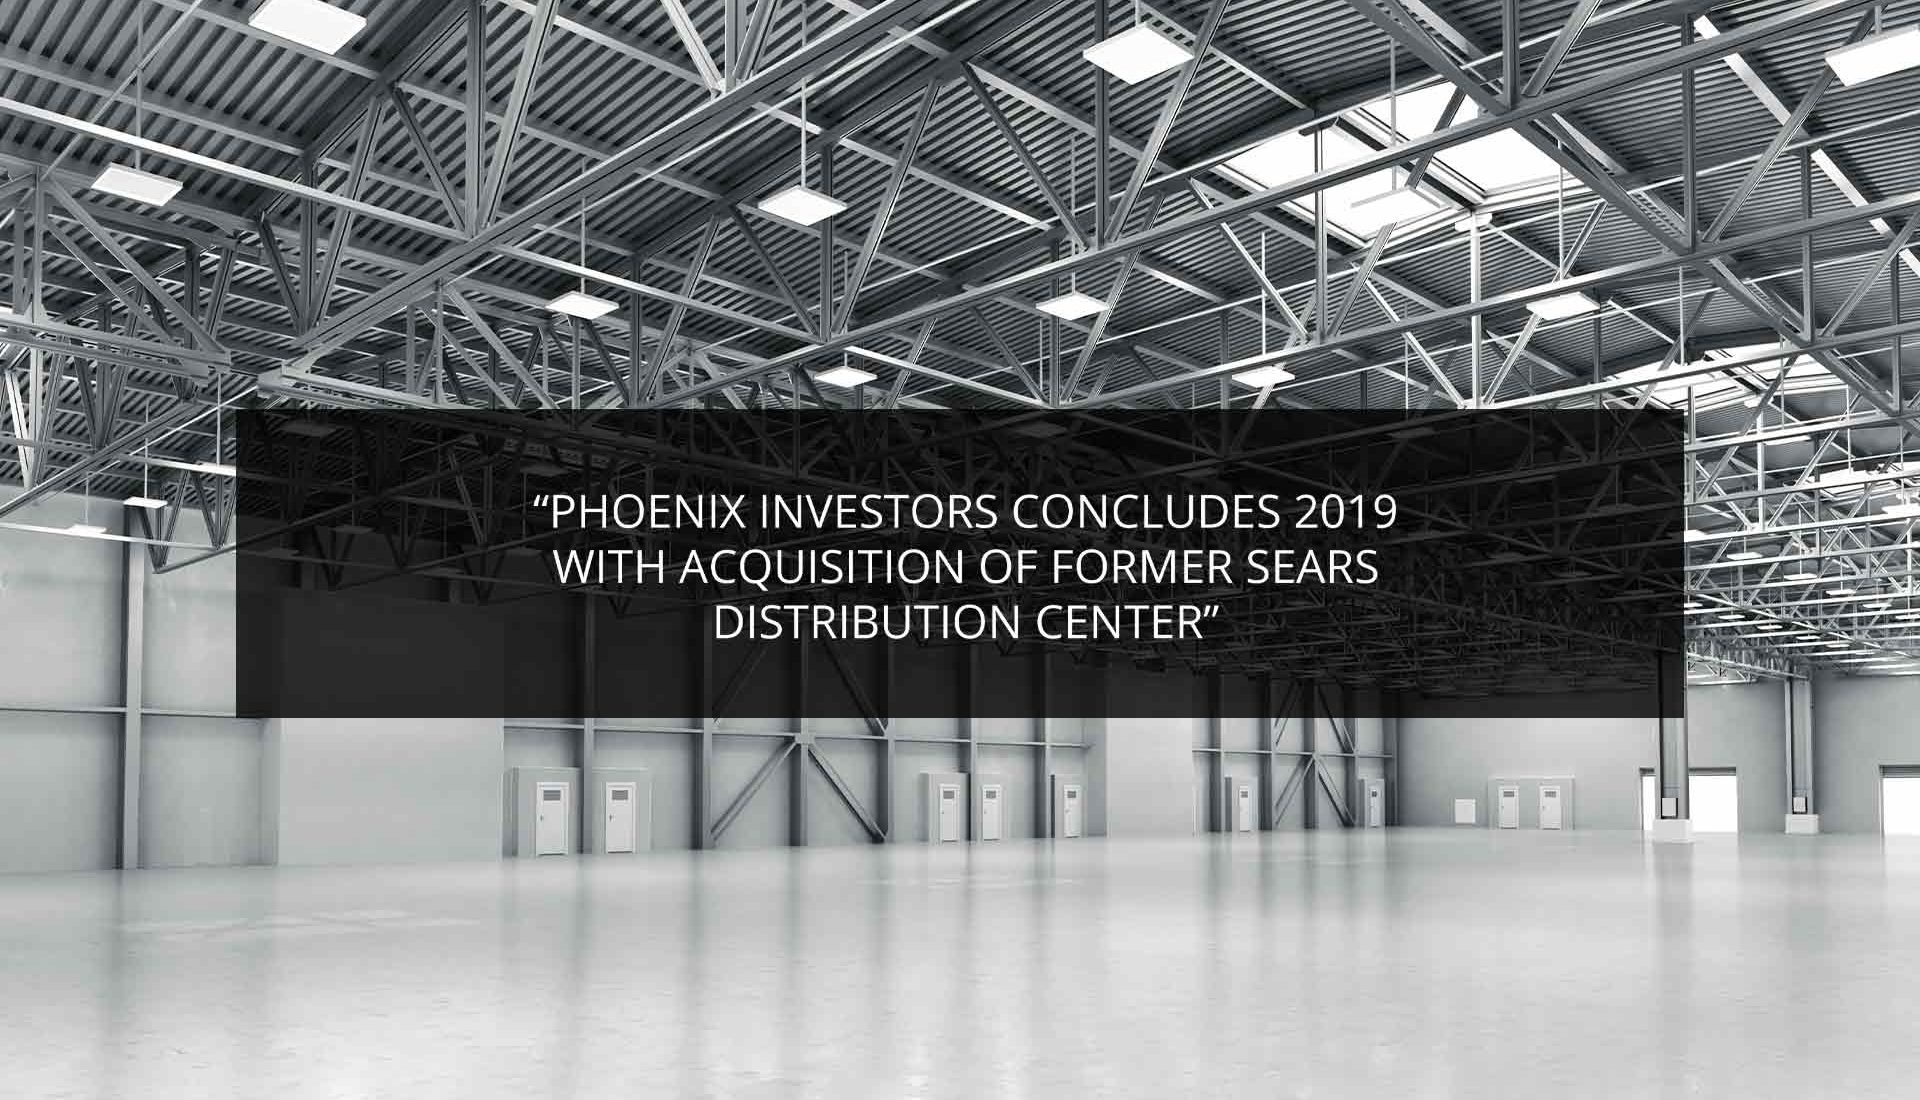 Phoenix Investors Concludes 2019 with acquisitions of Former Sears Distribution Center